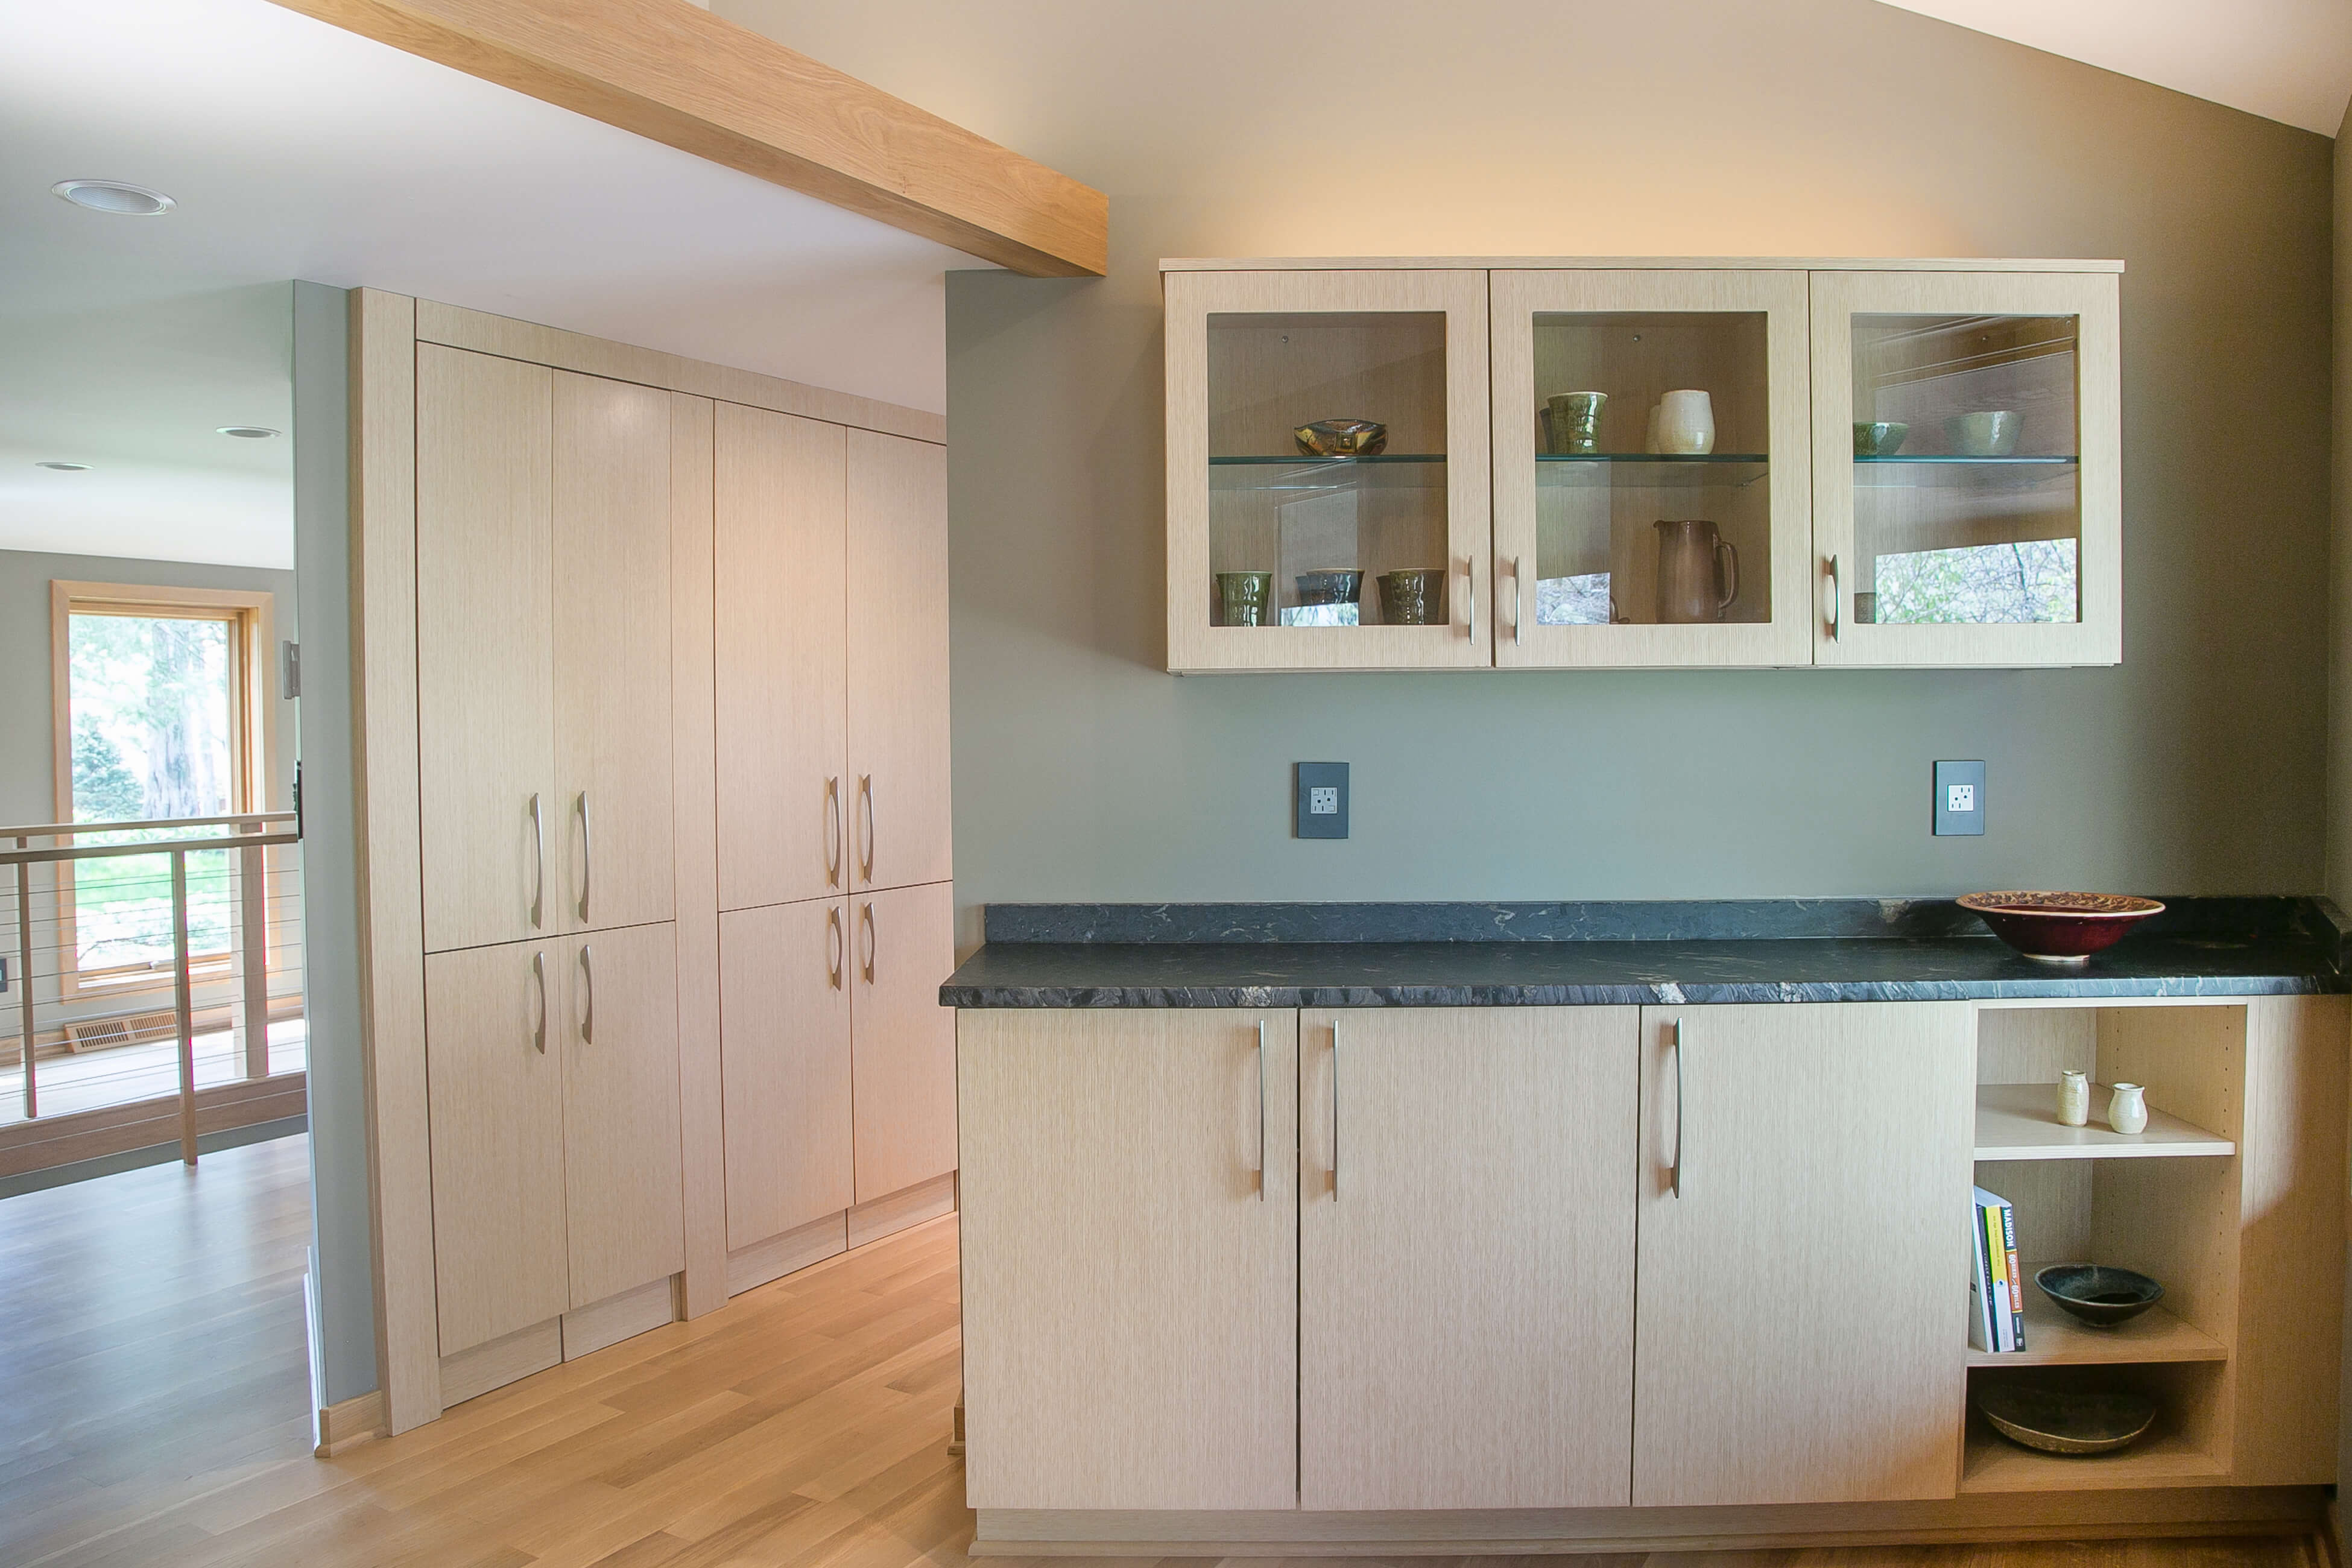 A beautiful contemporary kitchen design with light stained wood cabinets featuring a minimalistic slab door style.